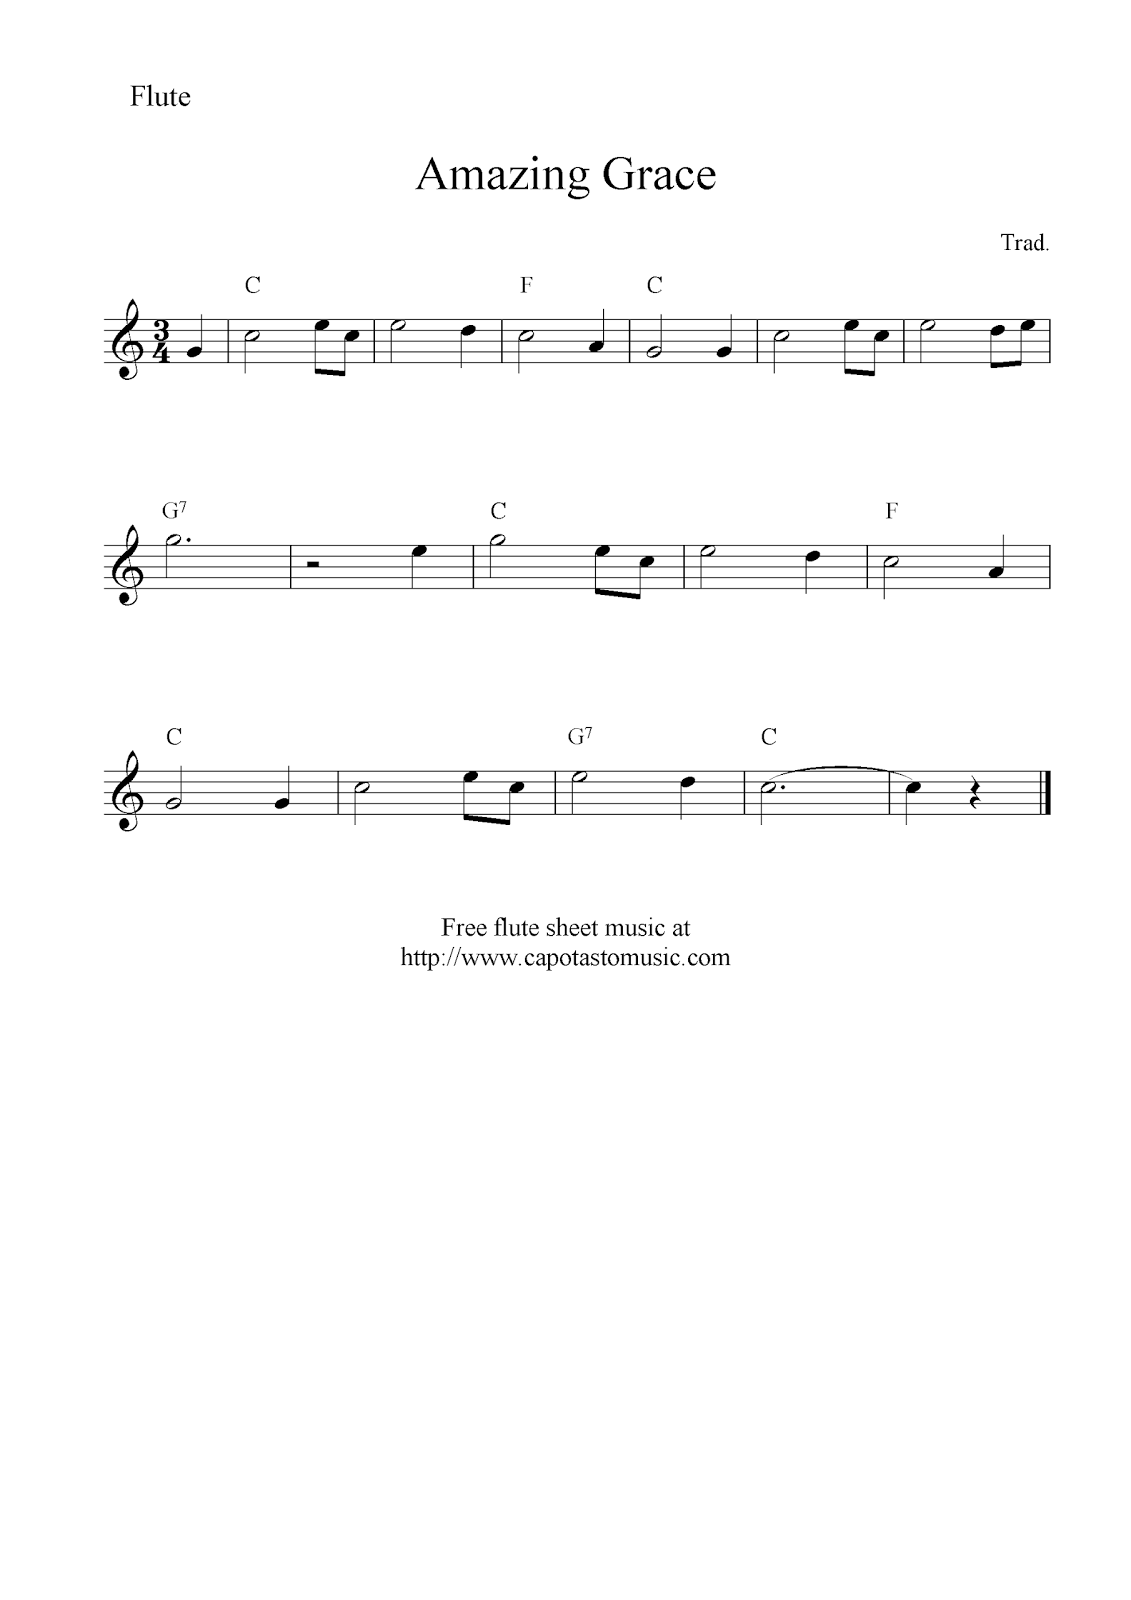 Amazing Grace Printable Sheet Music Authoritative Information About The